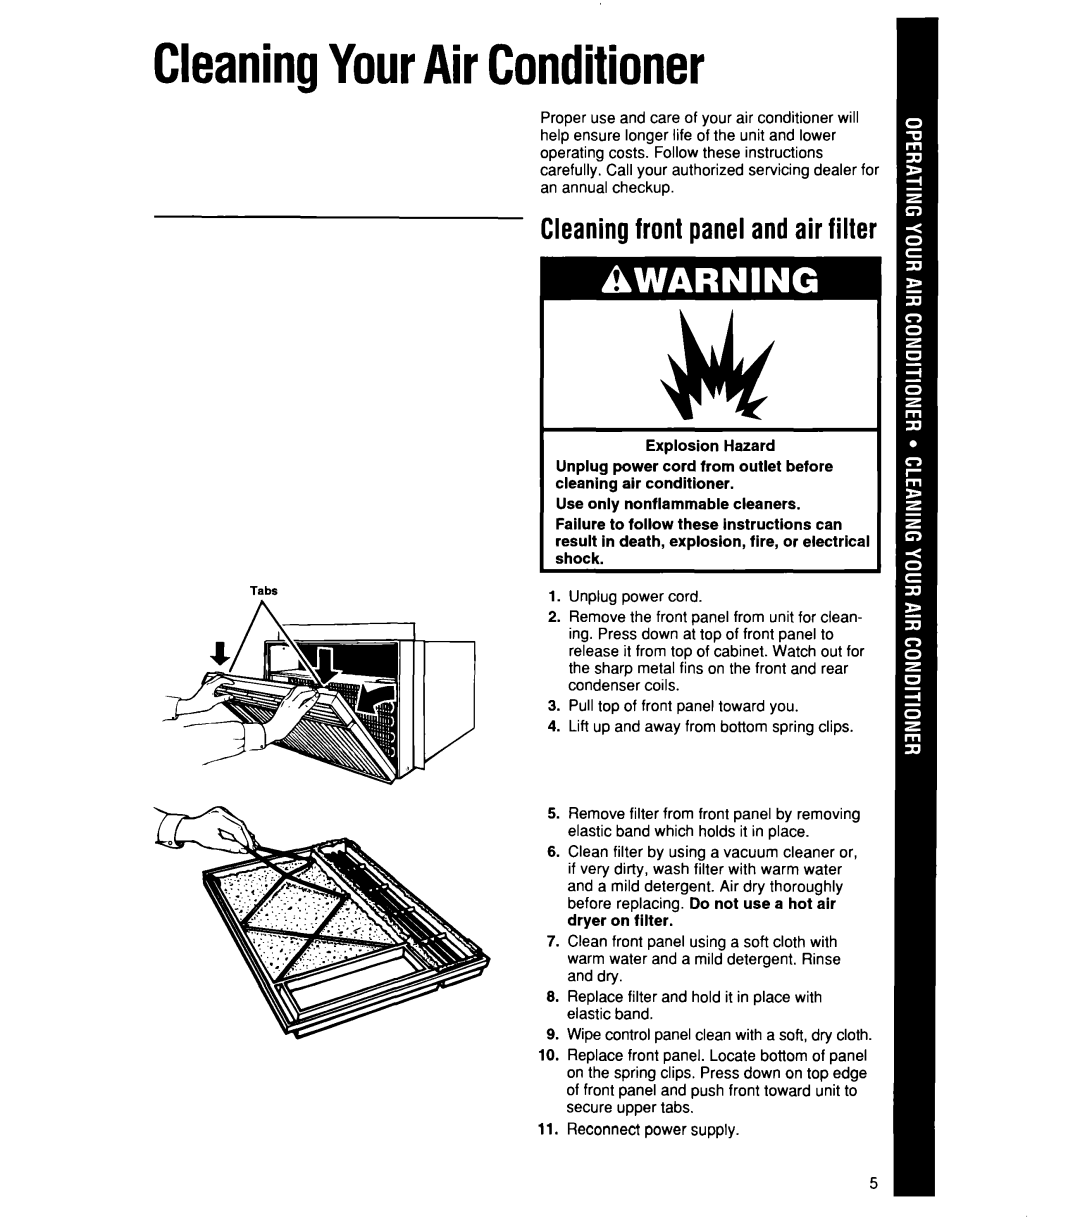 Whirlpool 1159801 manual CleaningYourAirConditioner, Cleaningfront panelandair filter 